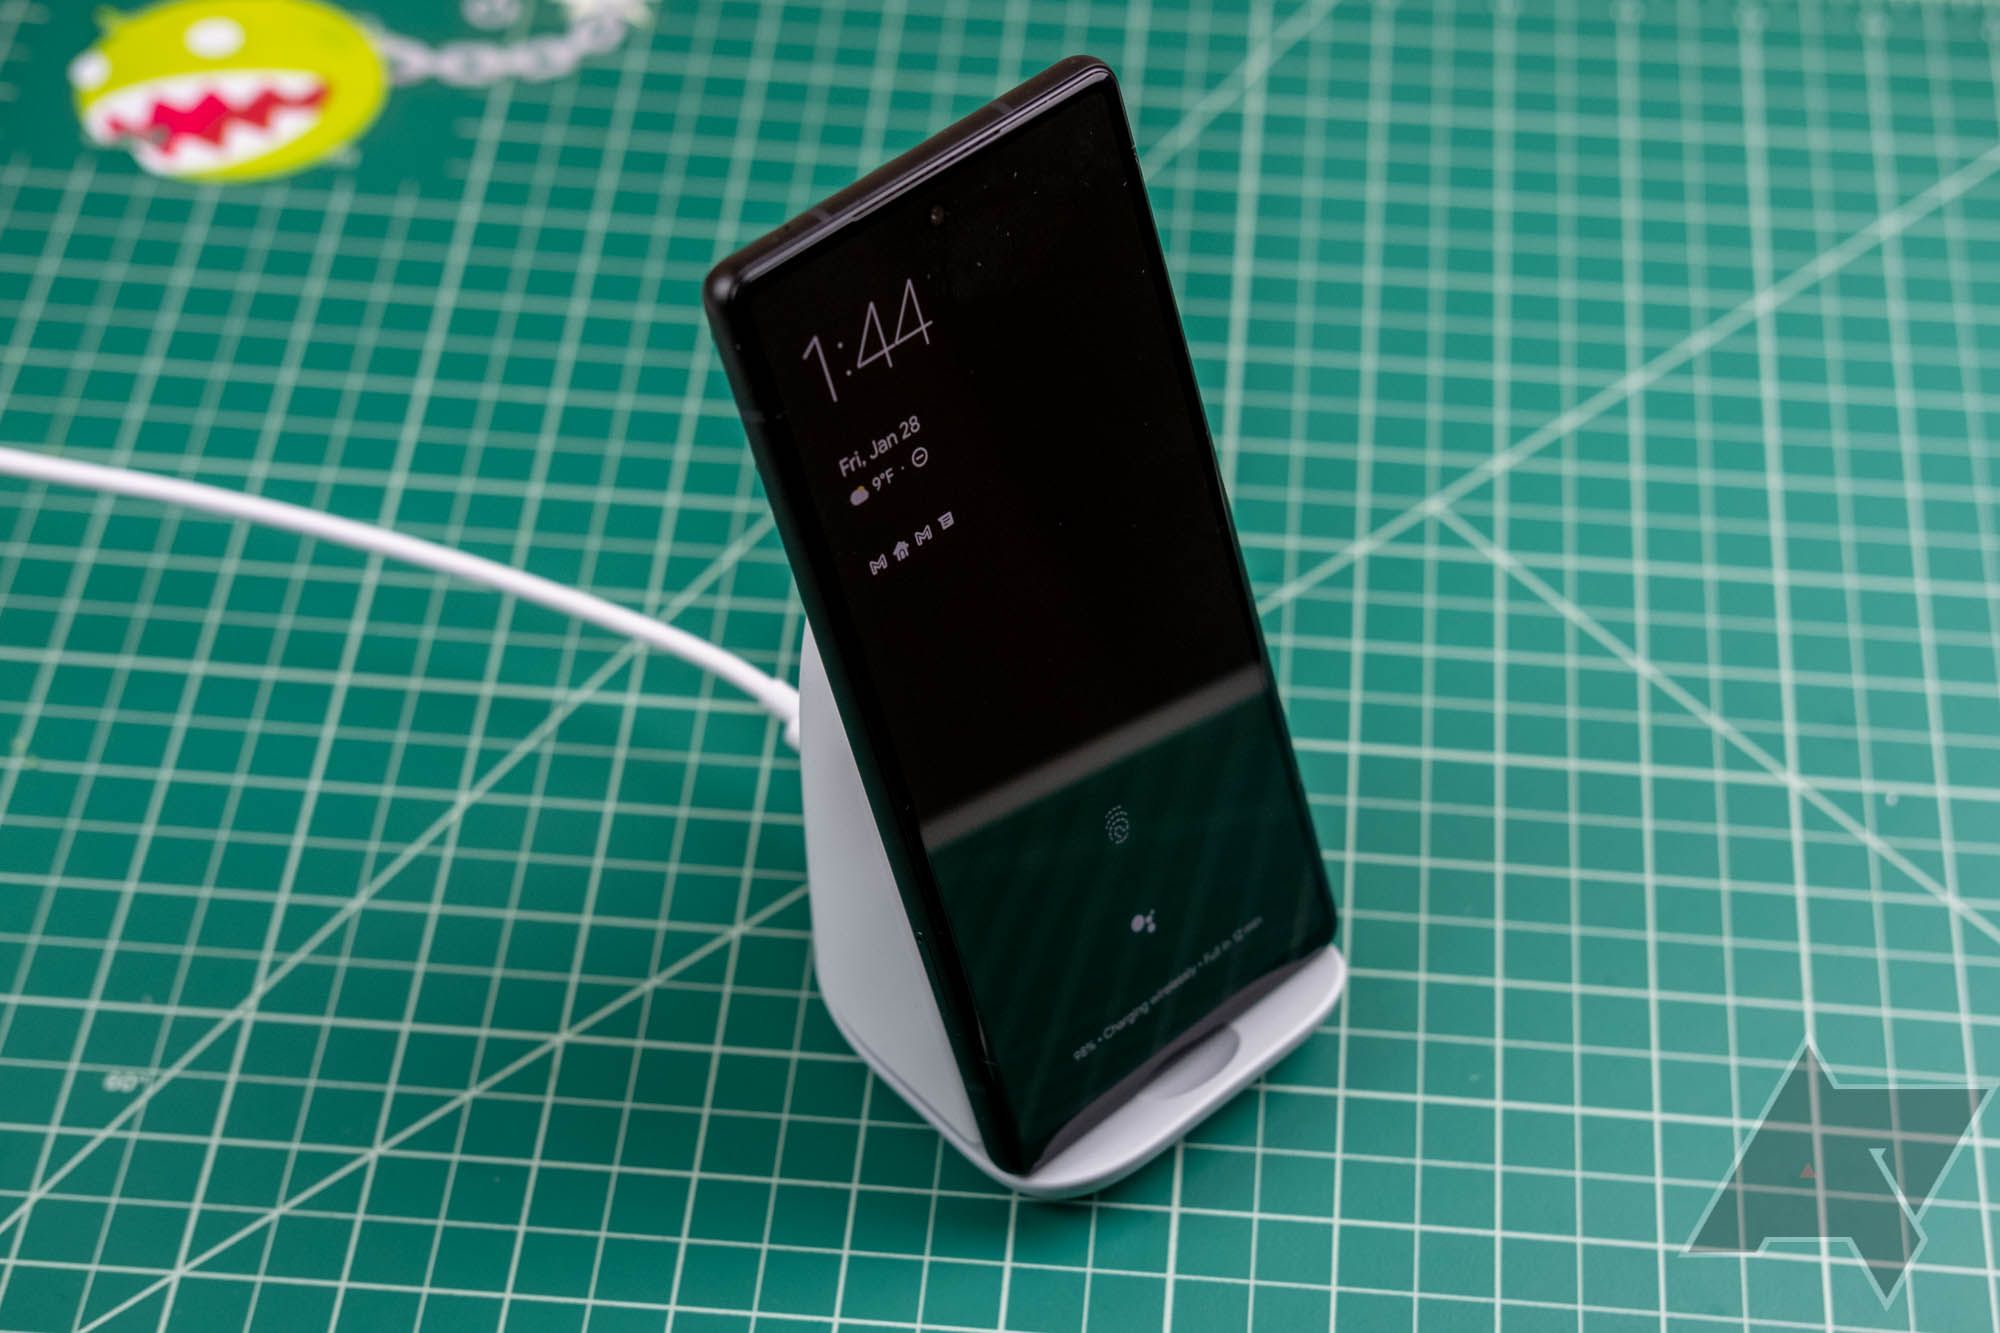 Google Pixel Stand review: Too many locks and not enough ease